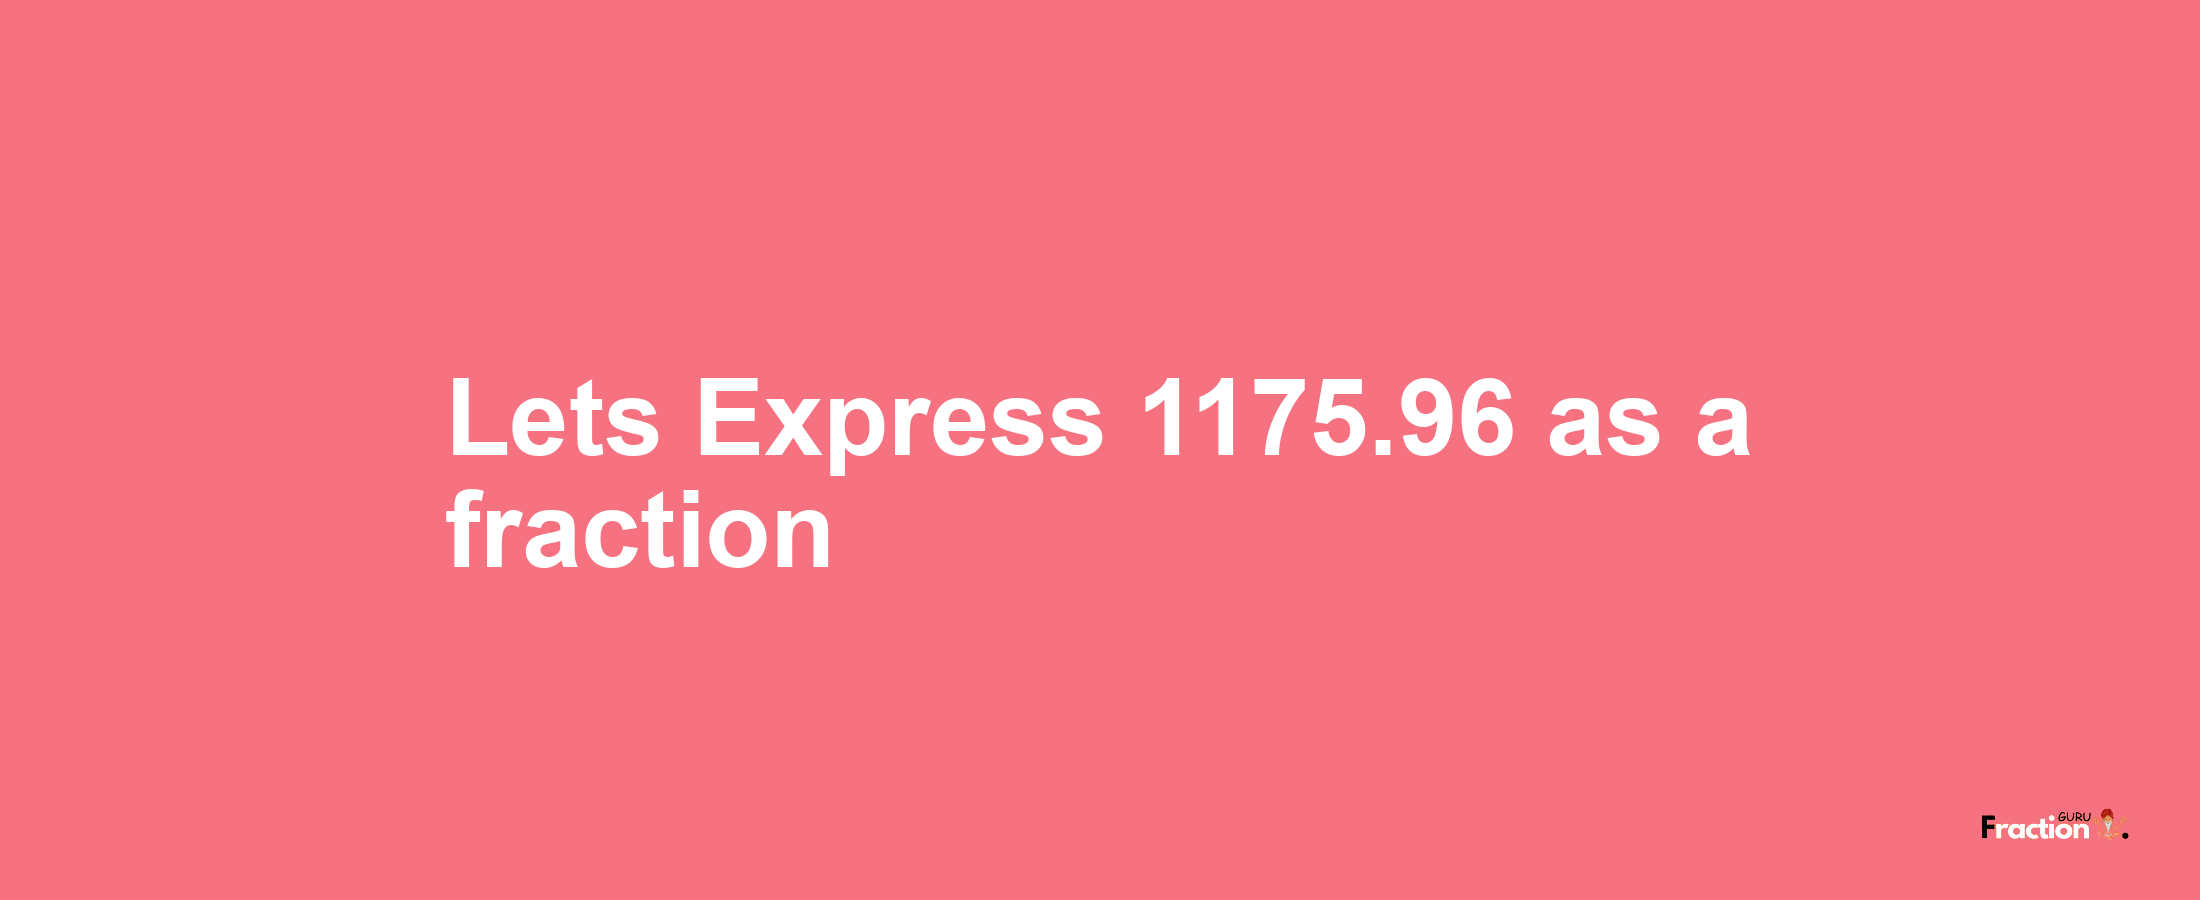 Lets Express 1175.96 as afraction